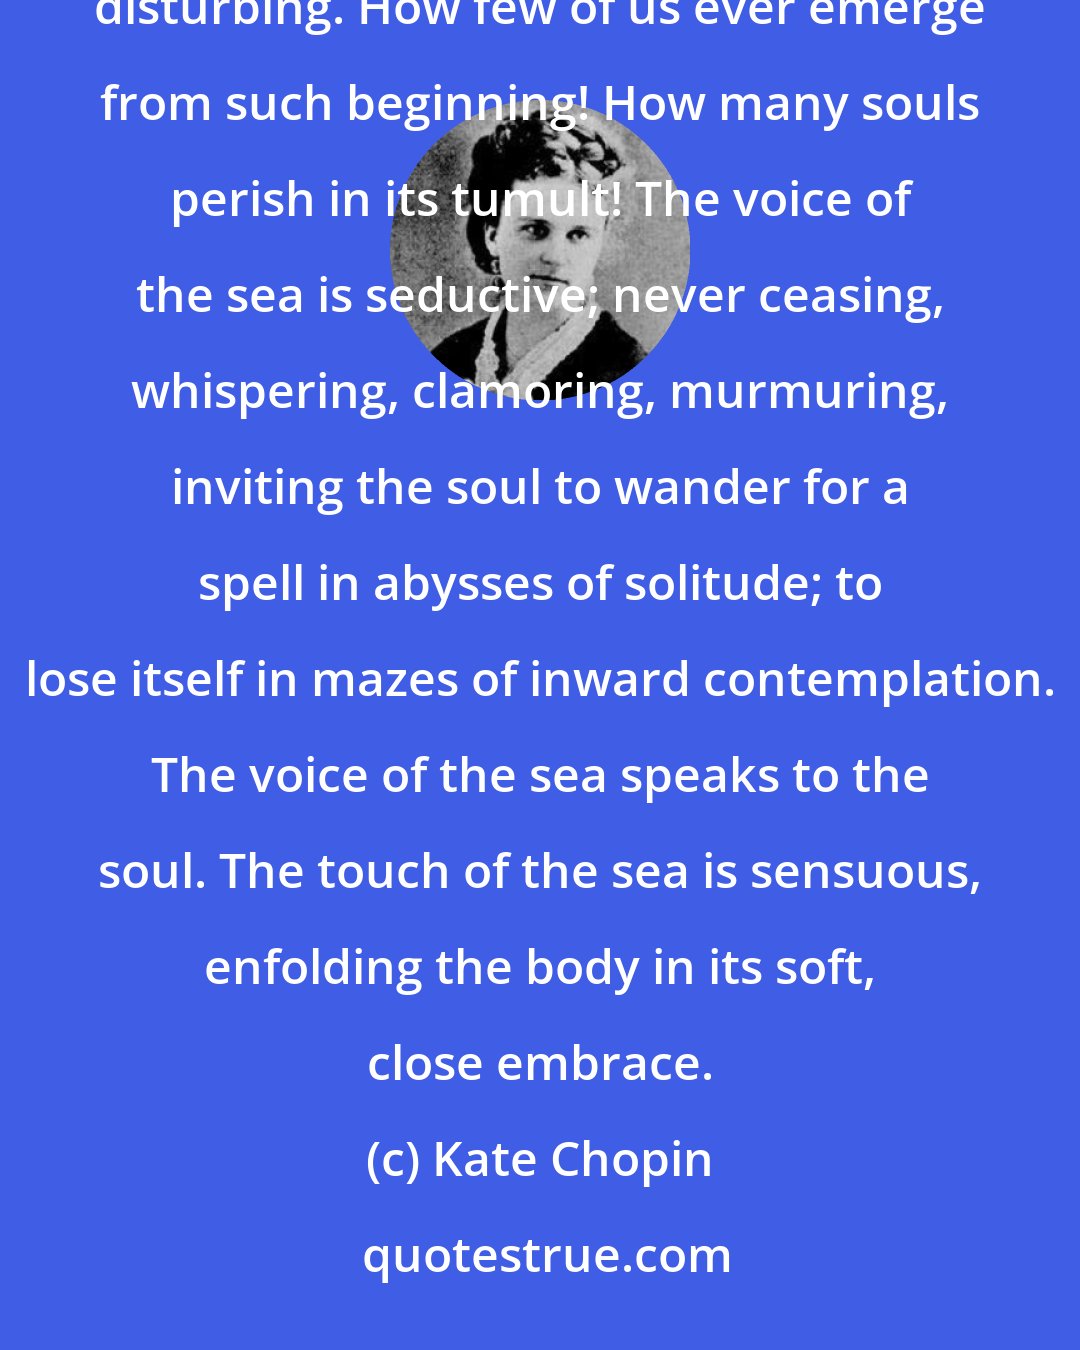 Kate Chopin: But the beginning of things, of a world especially, is necessarily vague, chaotic, and exceedingly disturbing. How few of us ever emerge from such beginning! How many souls perish in its tumult! The voice of the sea is seductive; never ceasing, whispering, clamoring, murmuring, inviting the soul to wander for a spell in abysses of solitude; to lose itself in mazes of inward contemplation. The voice of the sea speaks to the soul. The touch of the sea is sensuous, enfolding the body in its soft, close embrace.